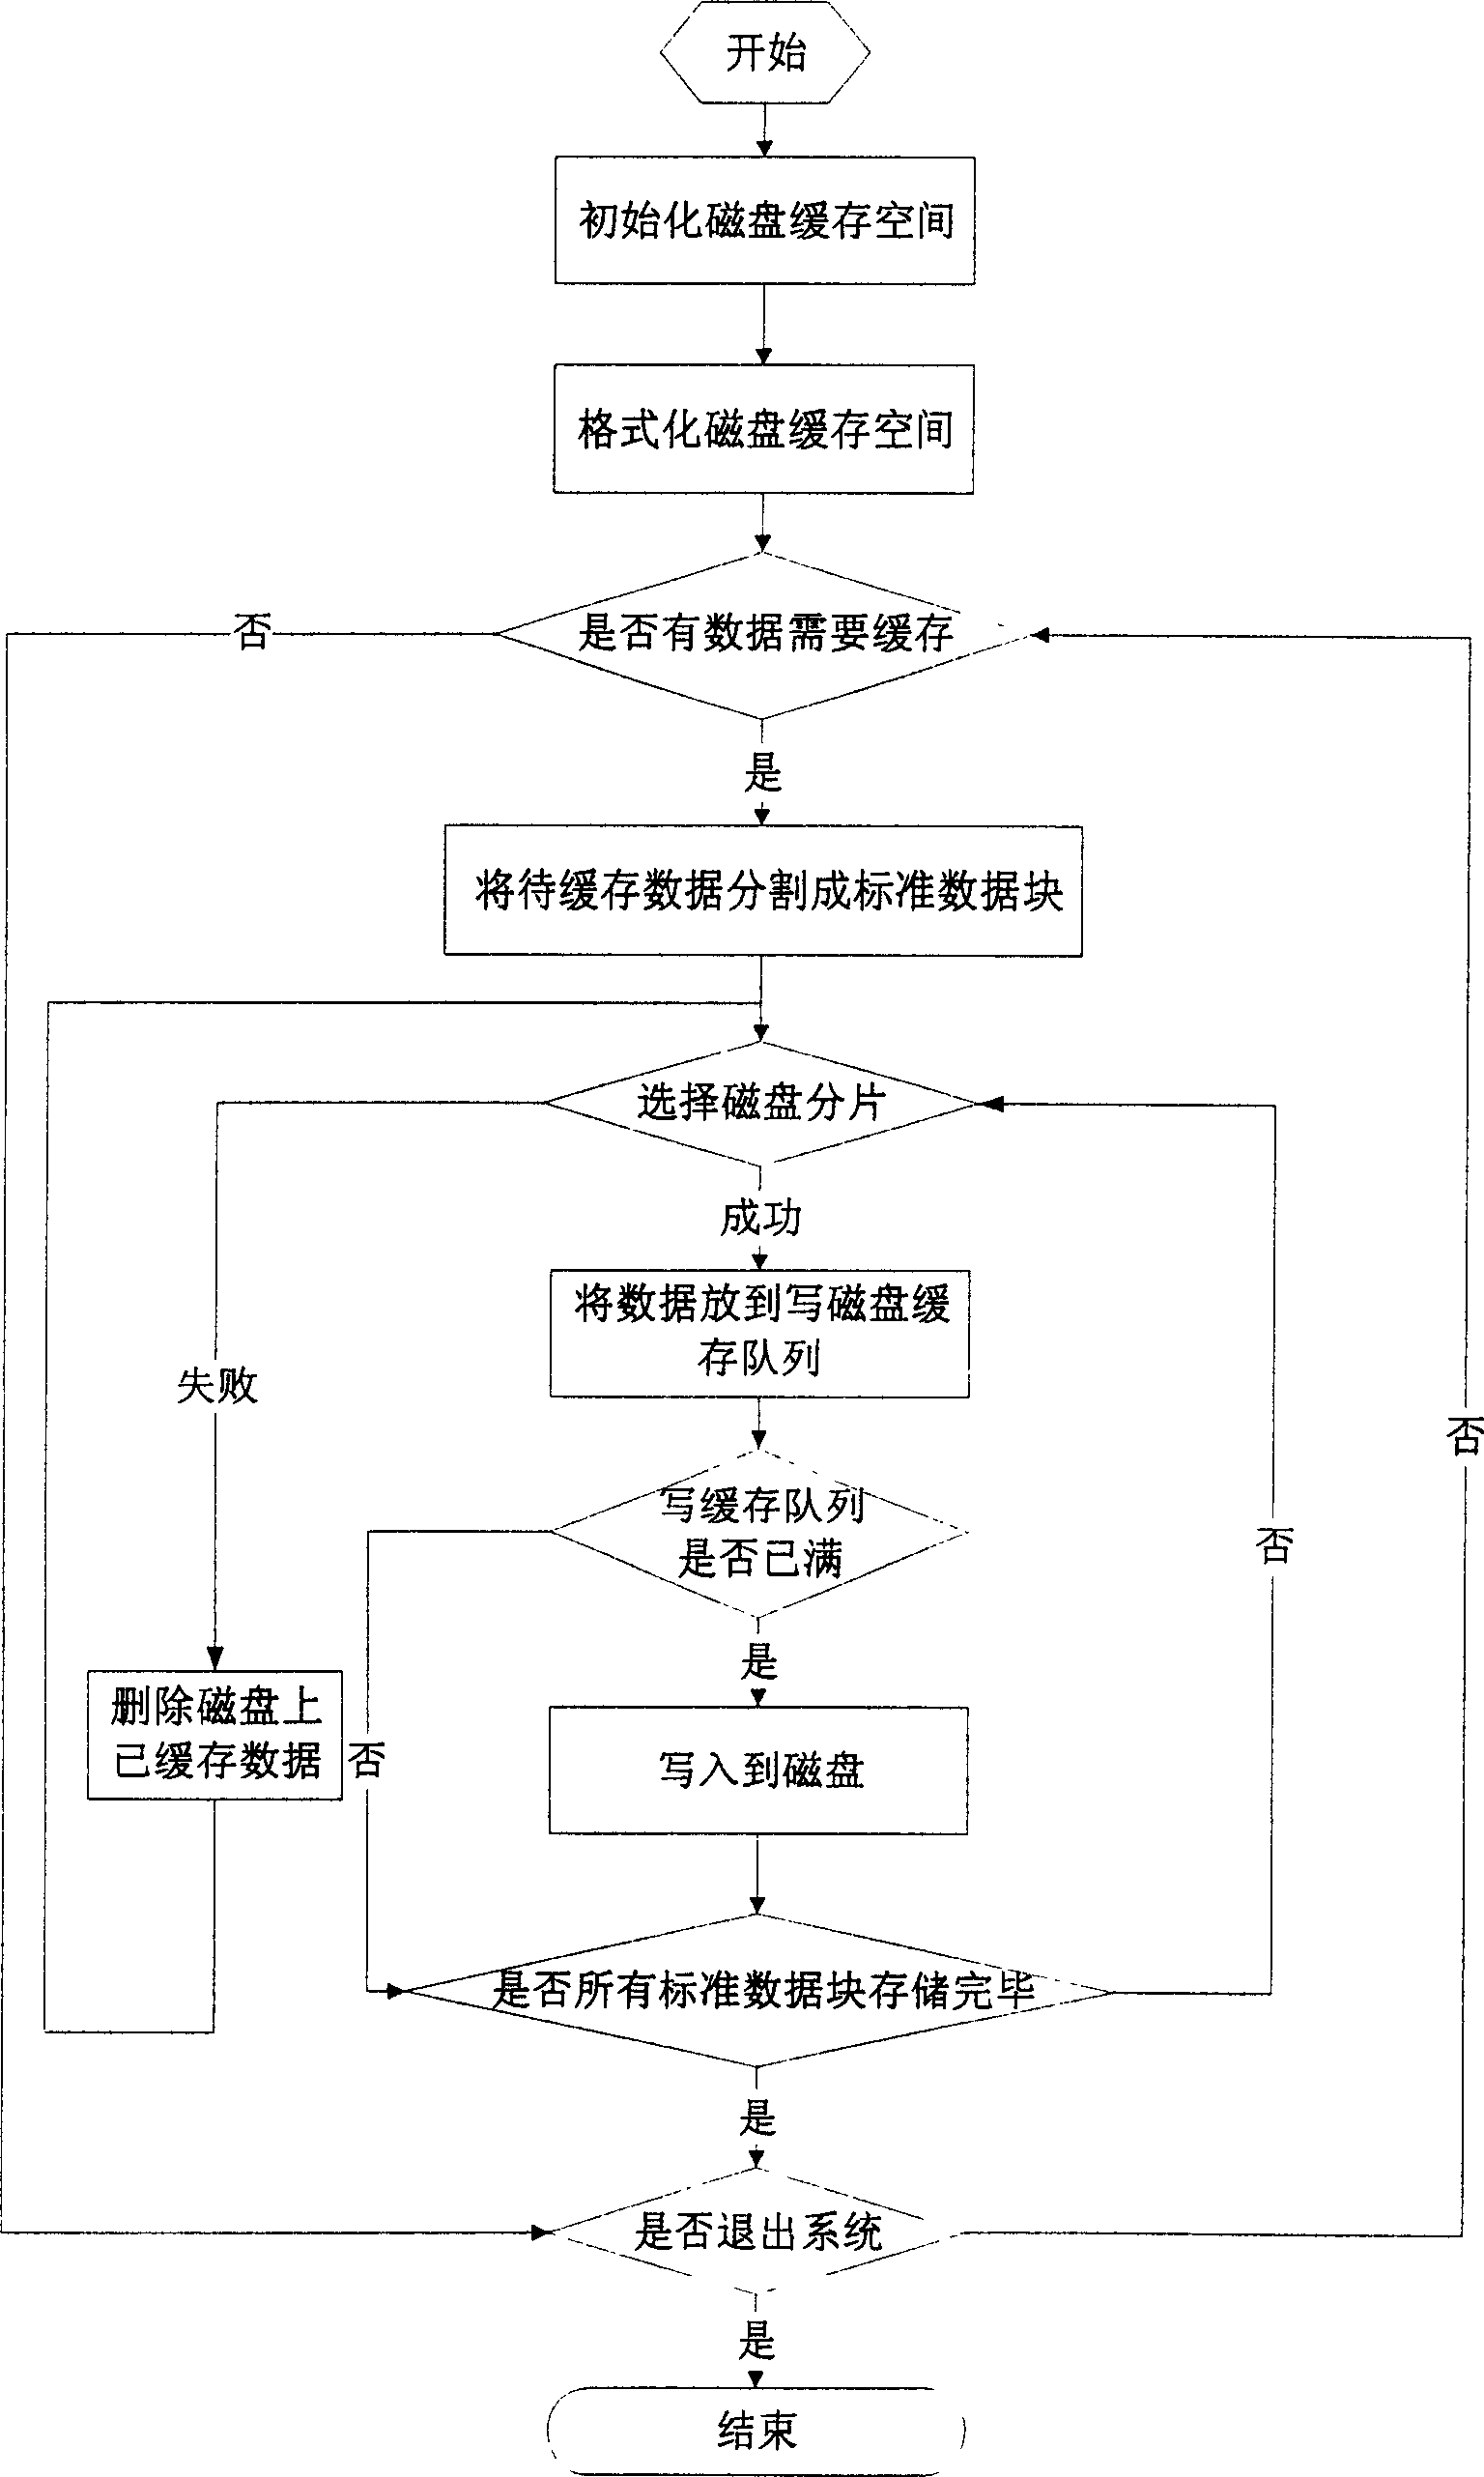 Disk buffering method in use for video on demand system of peer-to-peer network